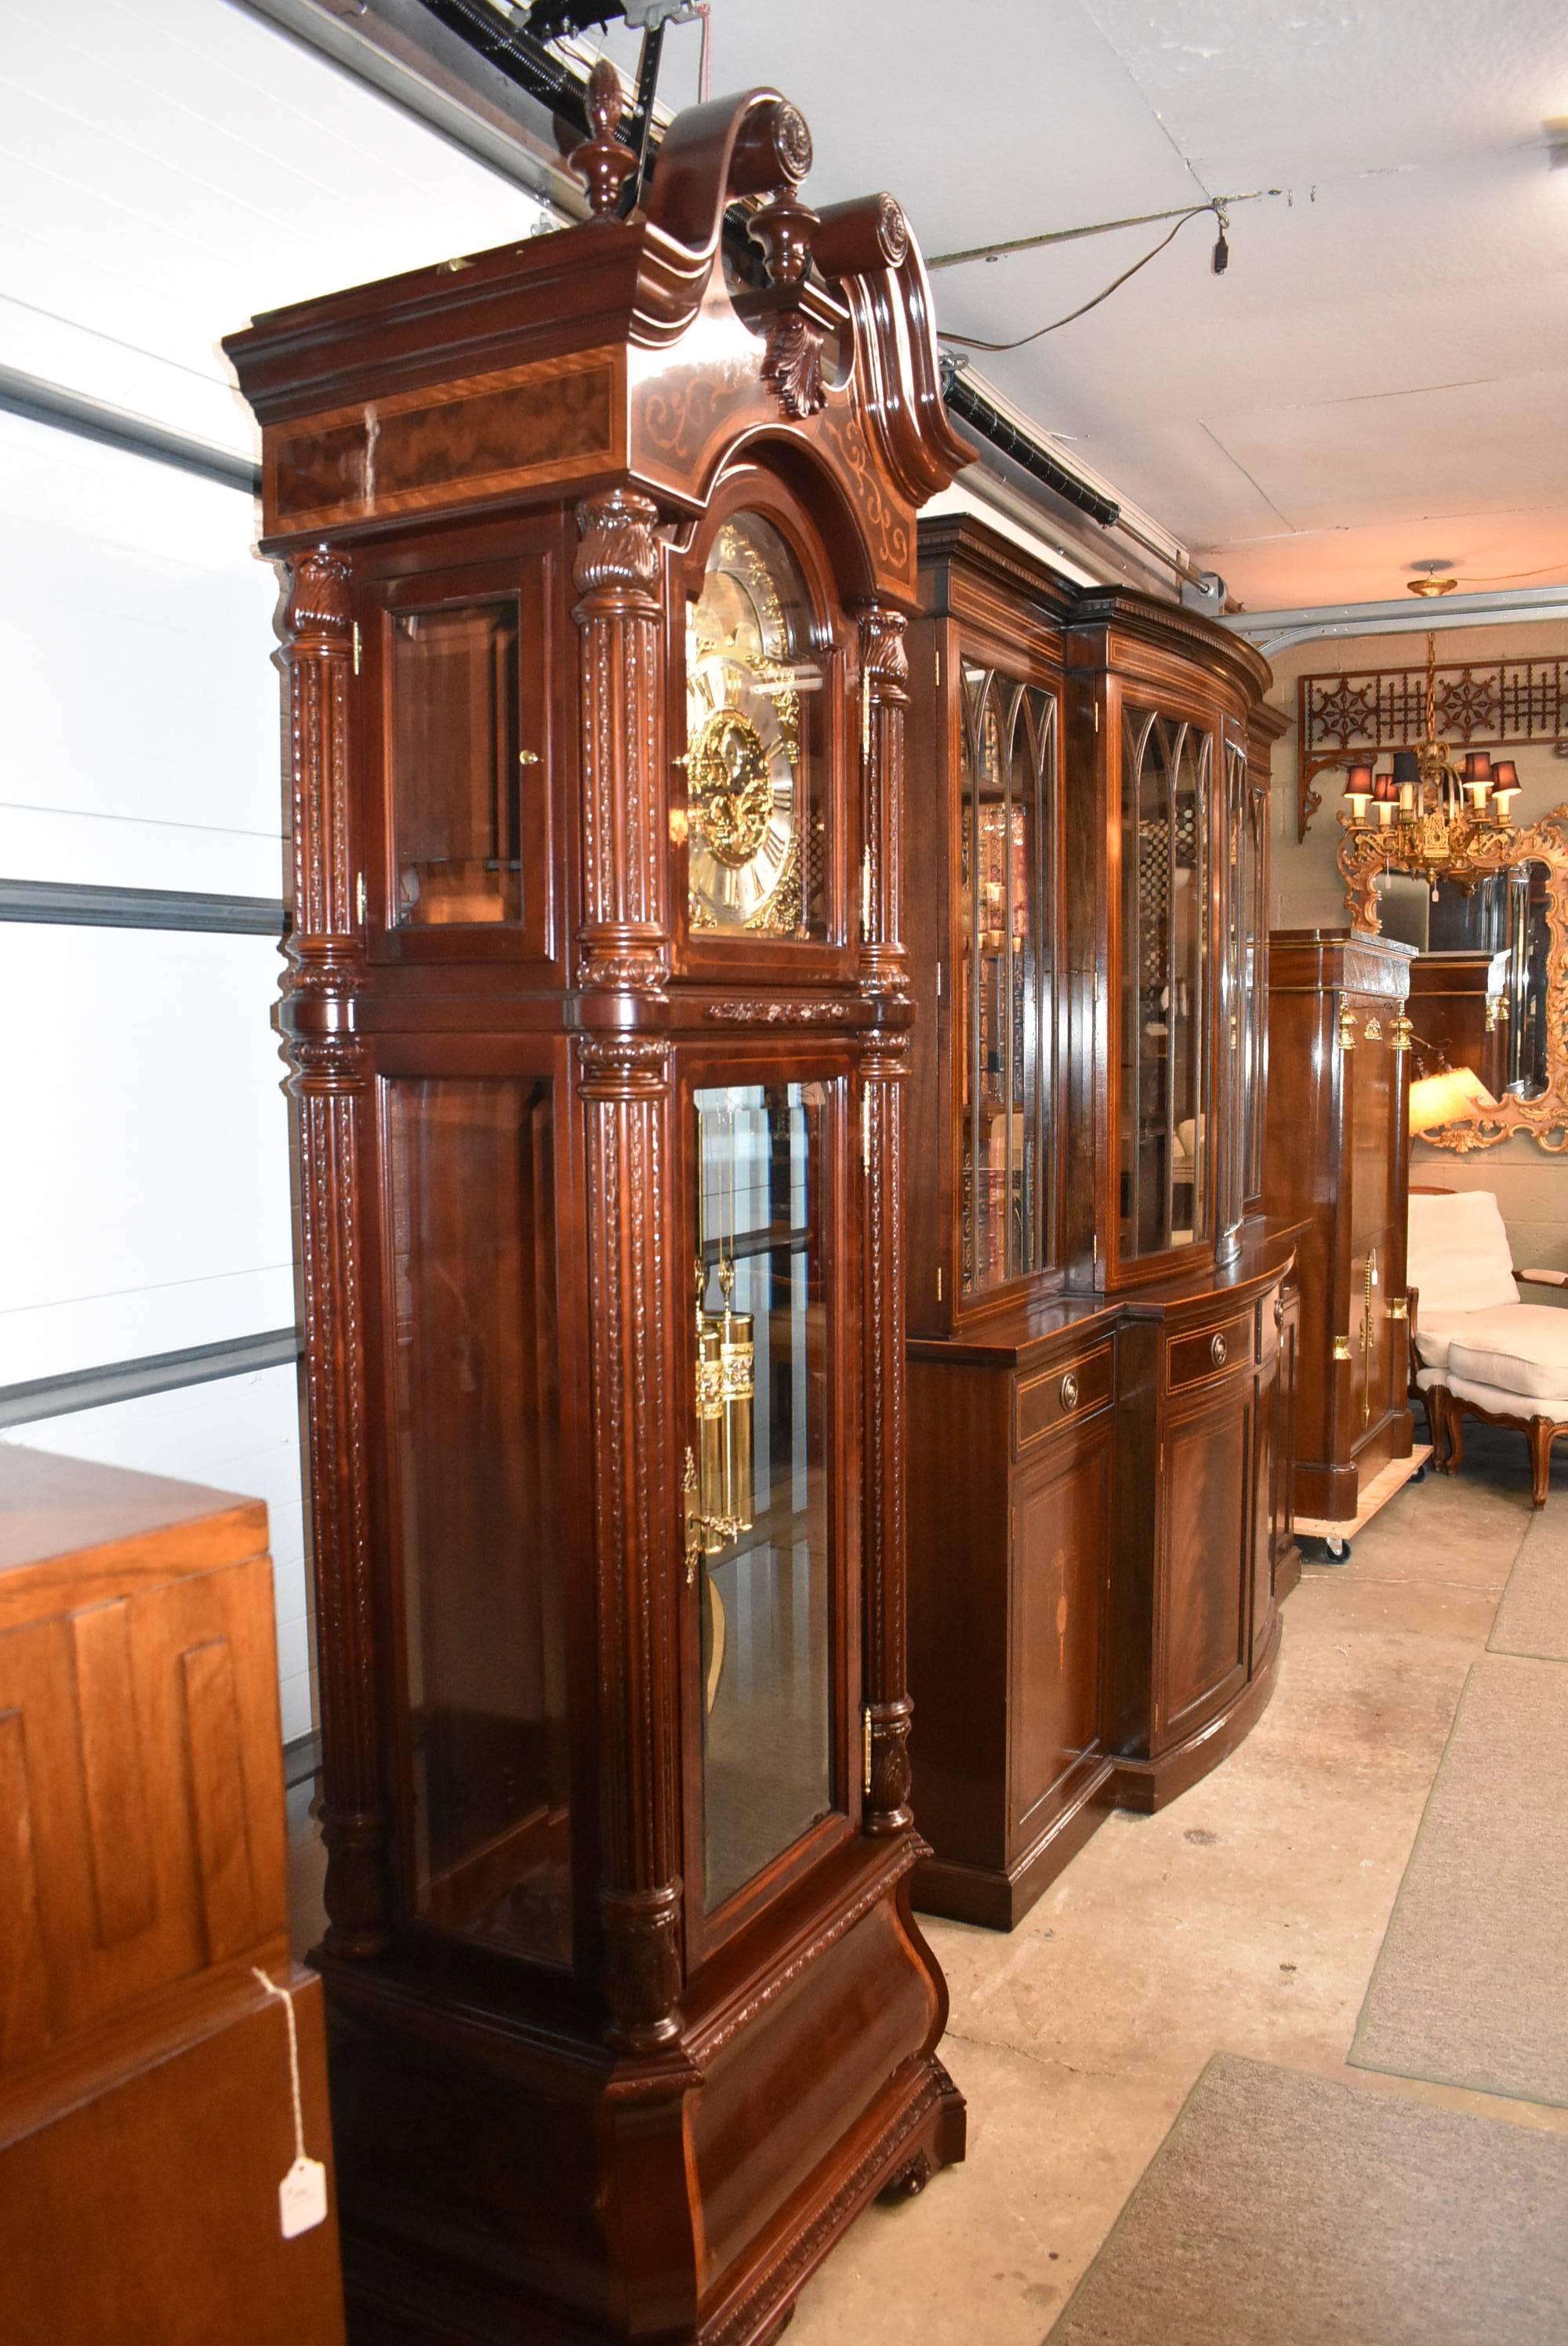 A stunning grandfather clock by Howard Miller, The J.H. Miller, 0611-030. This clock is 8 years old. This beautiful piece was finished in Windsor Cherry. The swan neck pediment is crowned with three carved finials, two carved rosettes and a carved